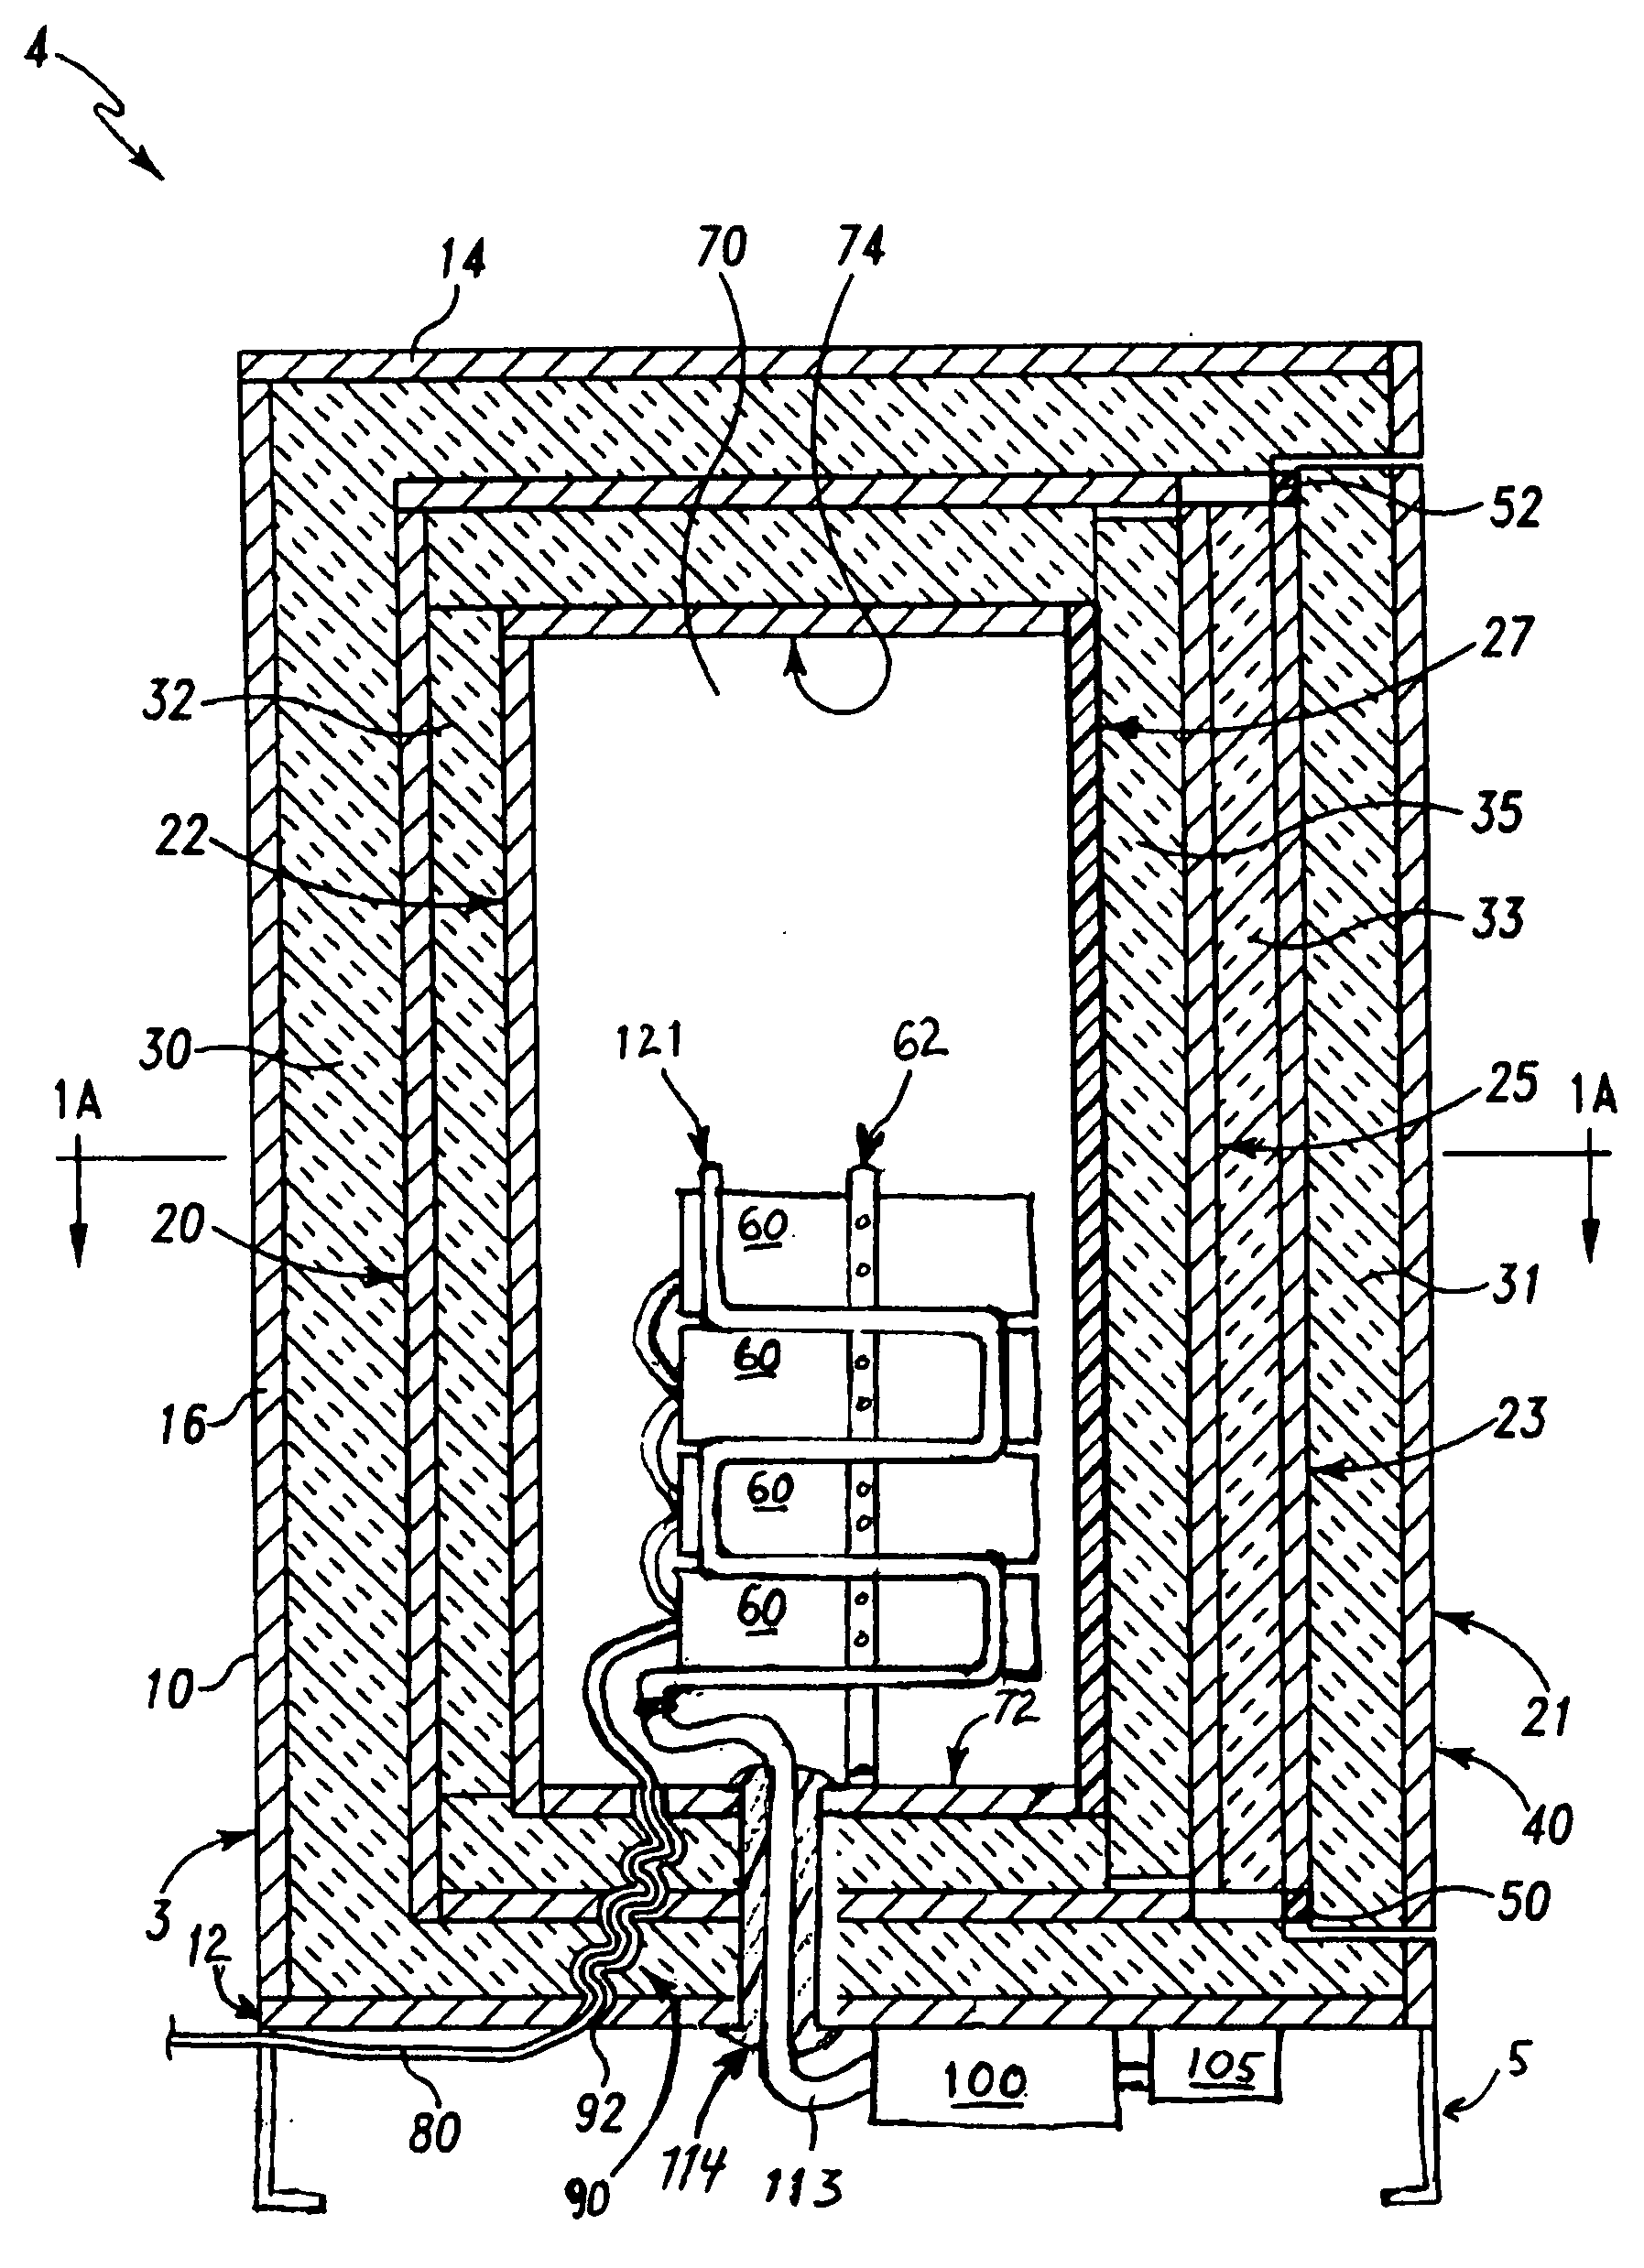 Fireproof data storage apparatus suitable for high ambient temperature environments and/or high wattage data storage devices